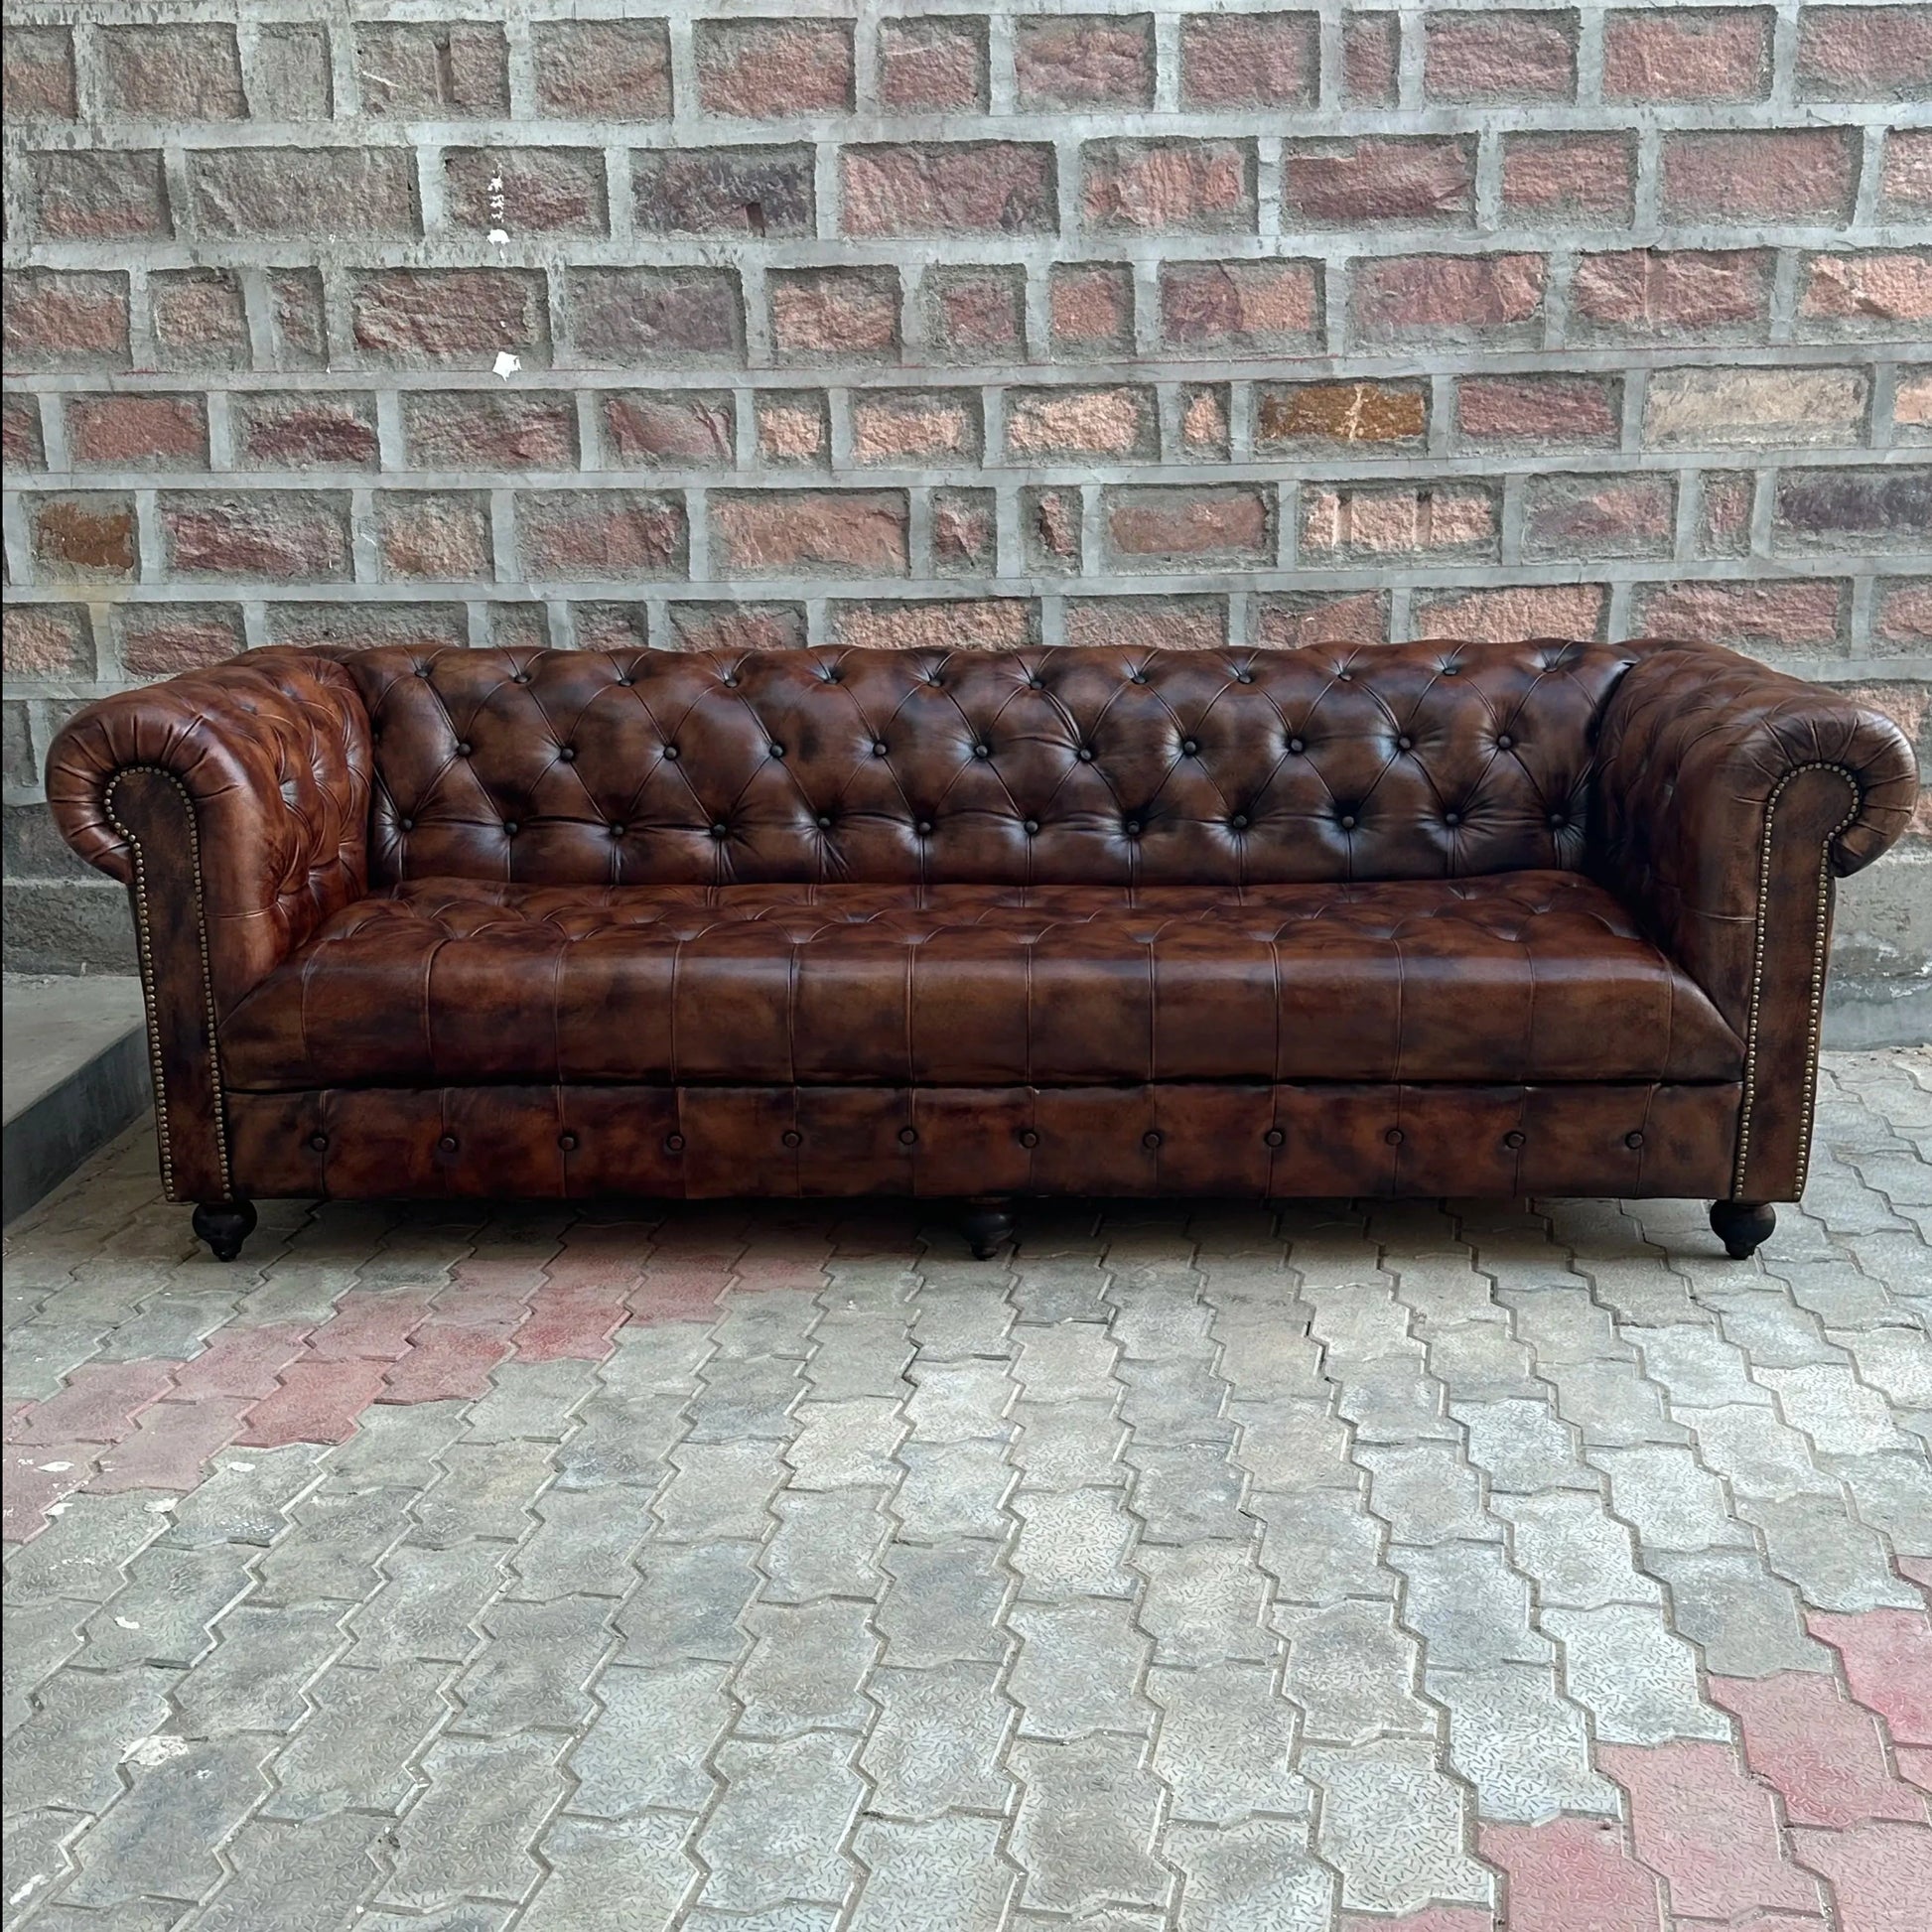 87" Sofa Tufted Bench | Remington Chesterfield Leather Sofa with Tufted Bench Seat (RE-3T) by Rising Tide Design Co.